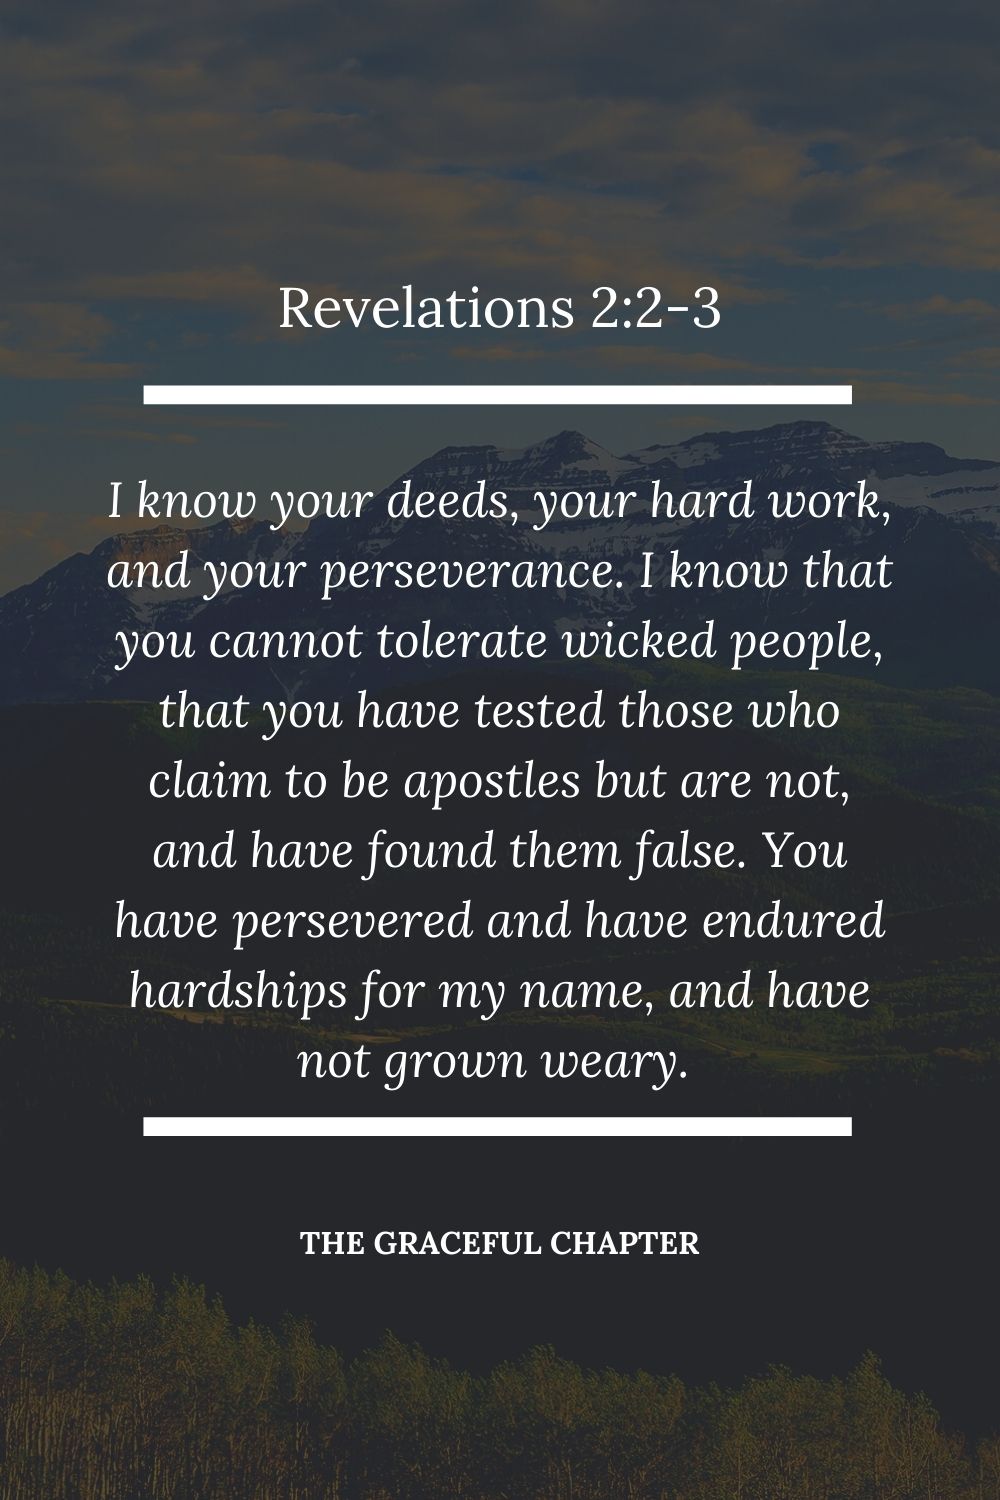 bible verses about perseverance